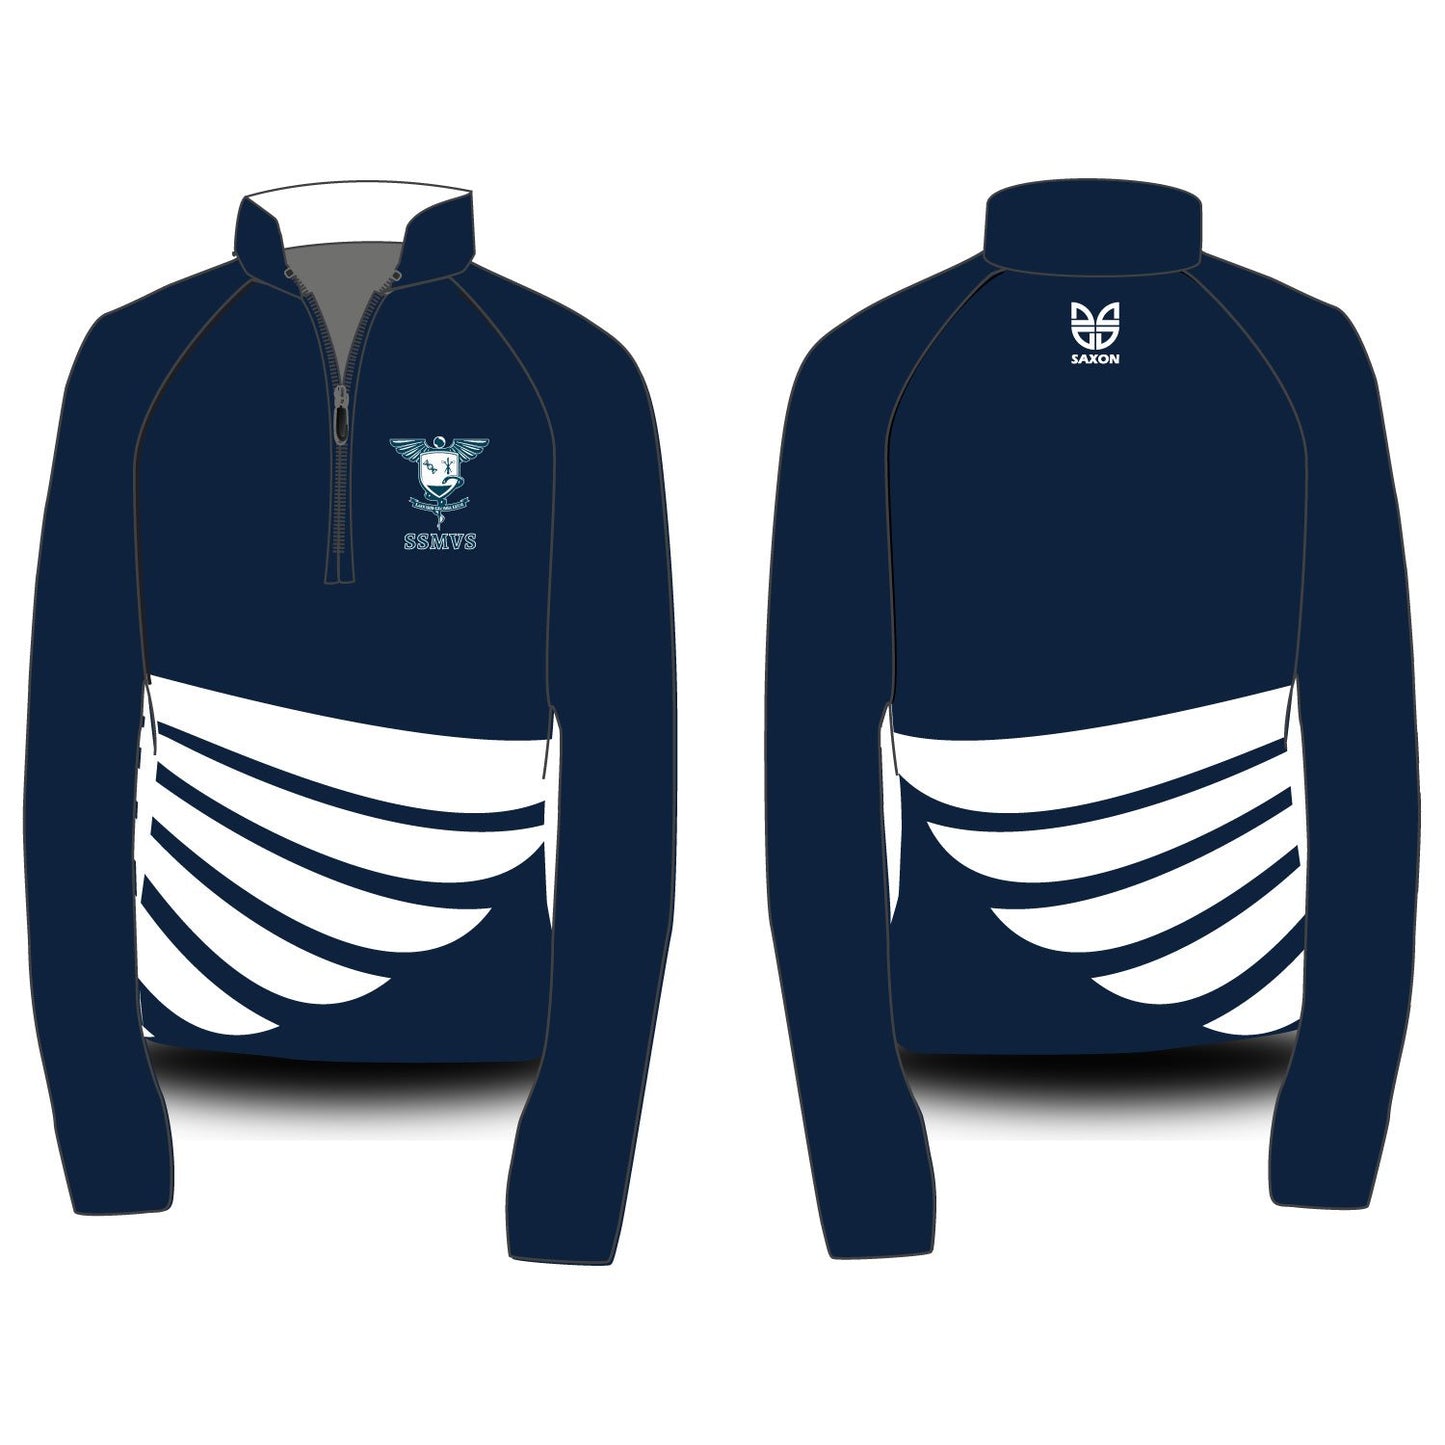 sidney sussex medical and veterinary society sub fleece wings